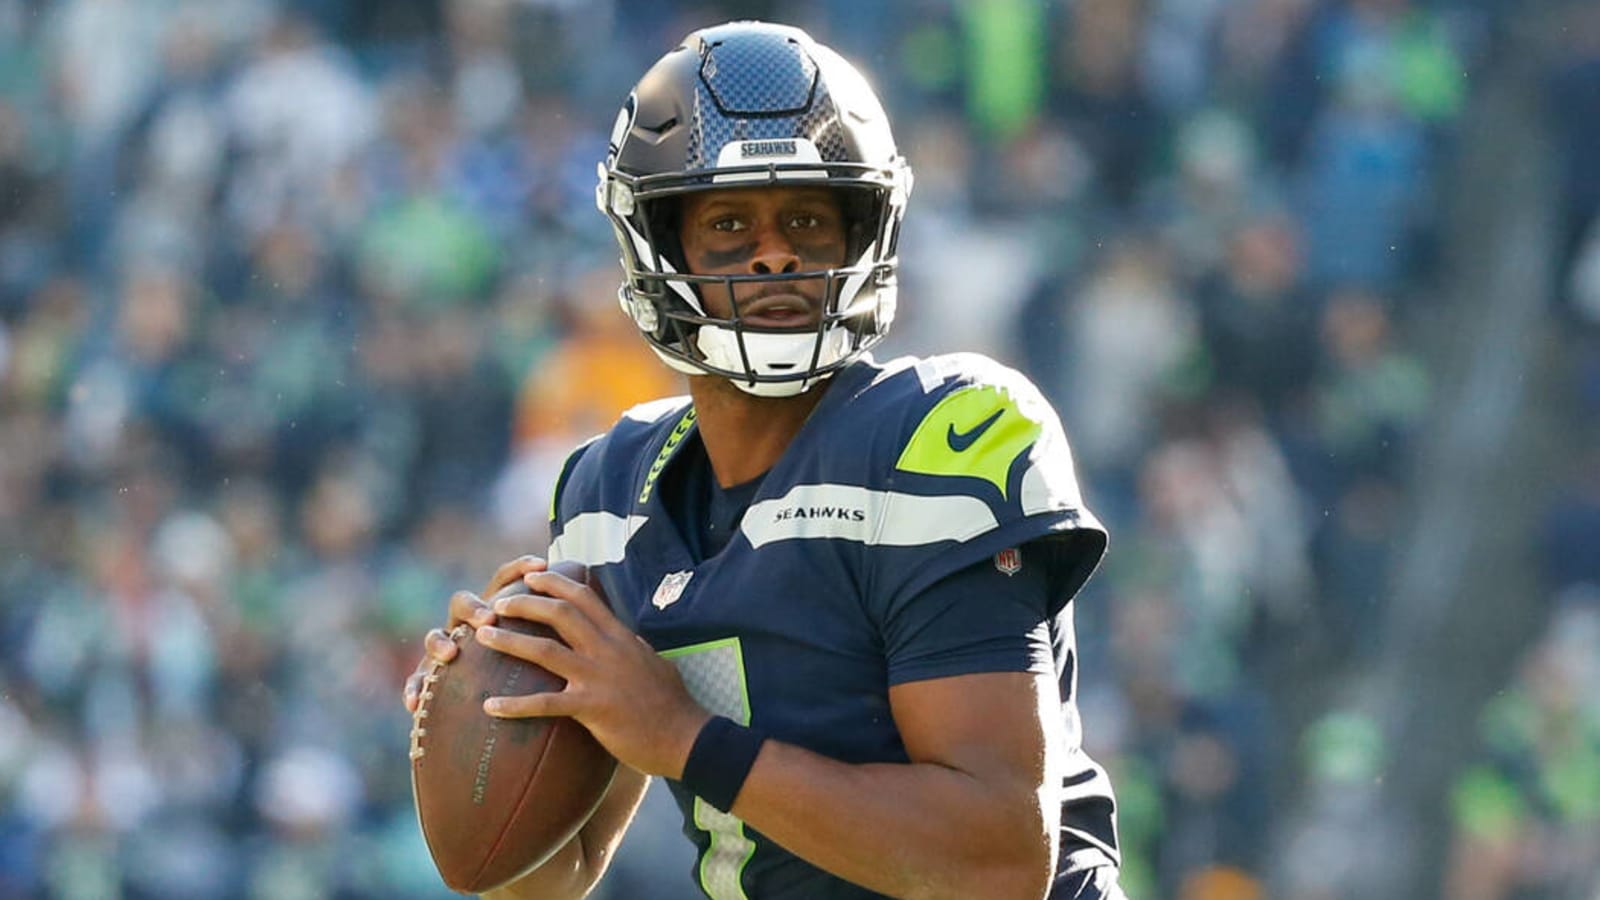 Seahawks' re-signing of QB Geno Smith now official